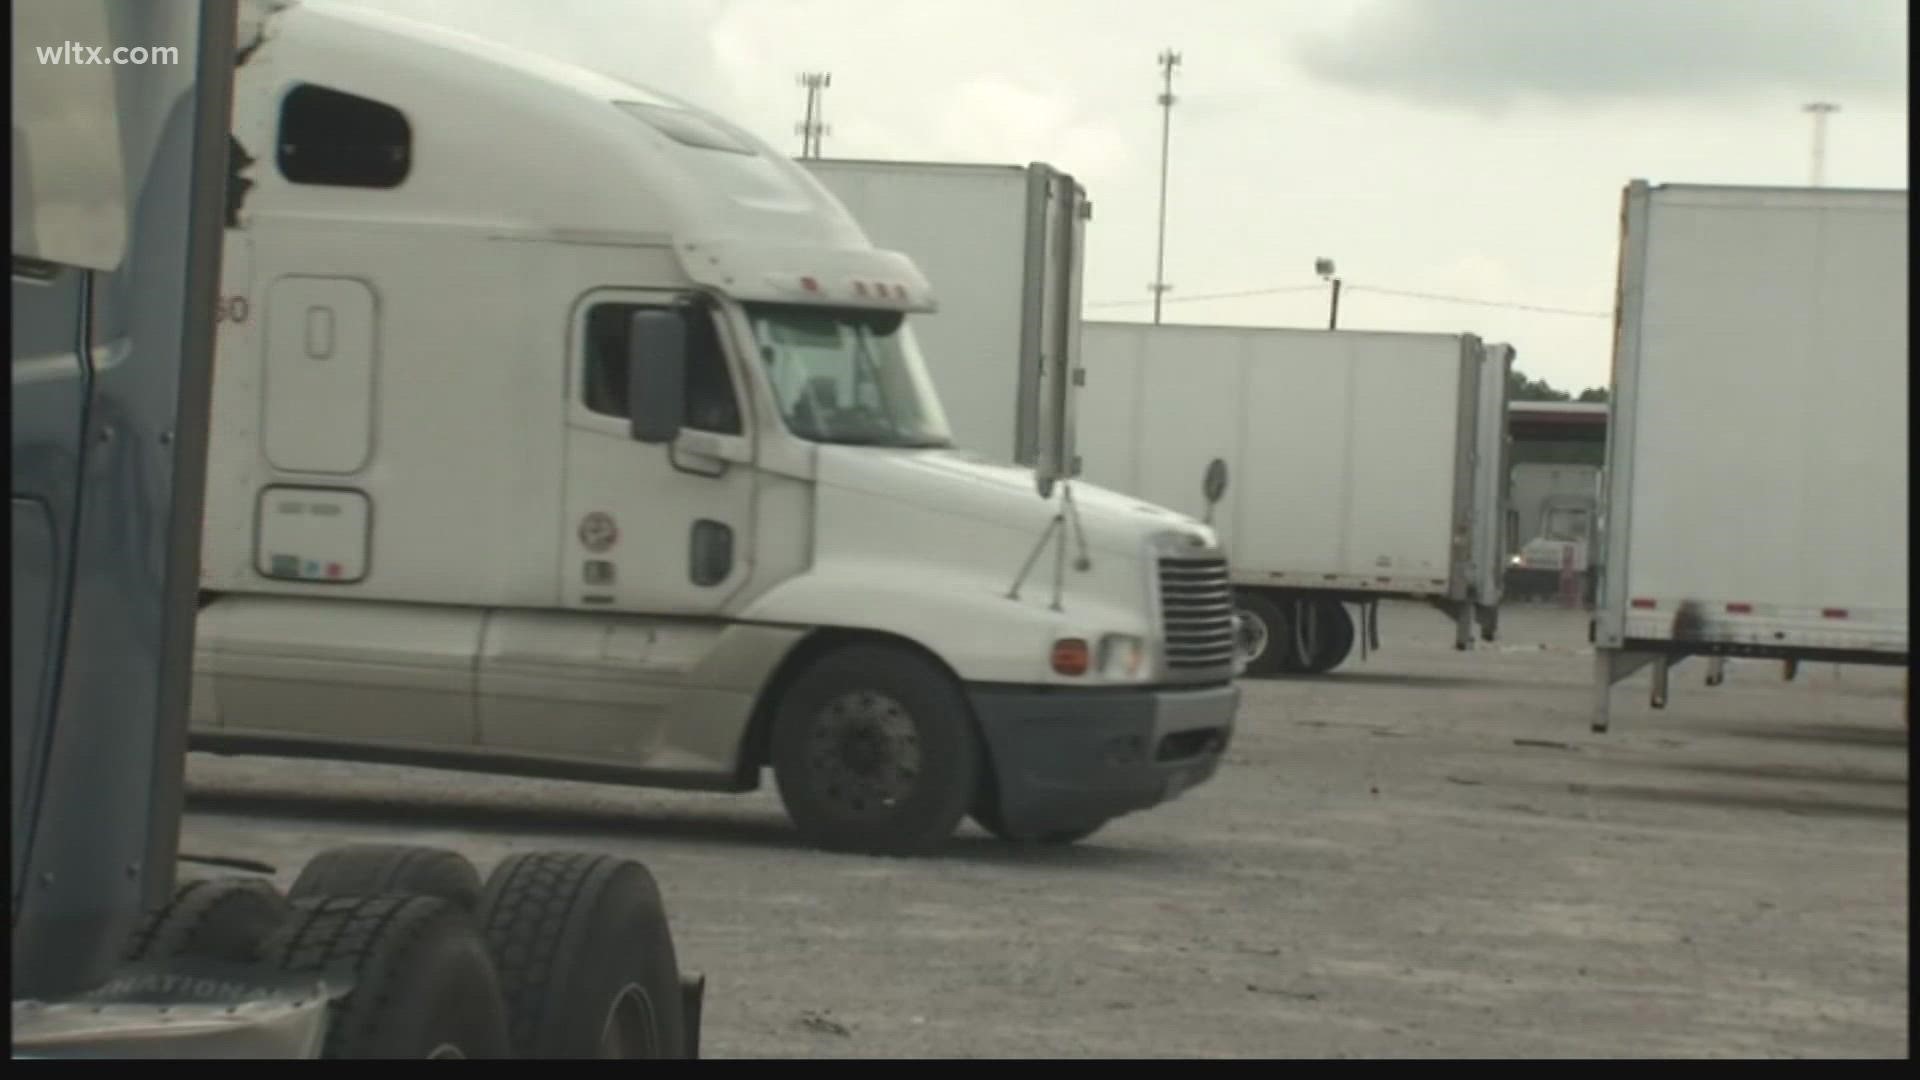 Governor Henry McMaster on Tuesday issued an executive order aimed at giving trucking companies a greater chance of making deliveries on time.